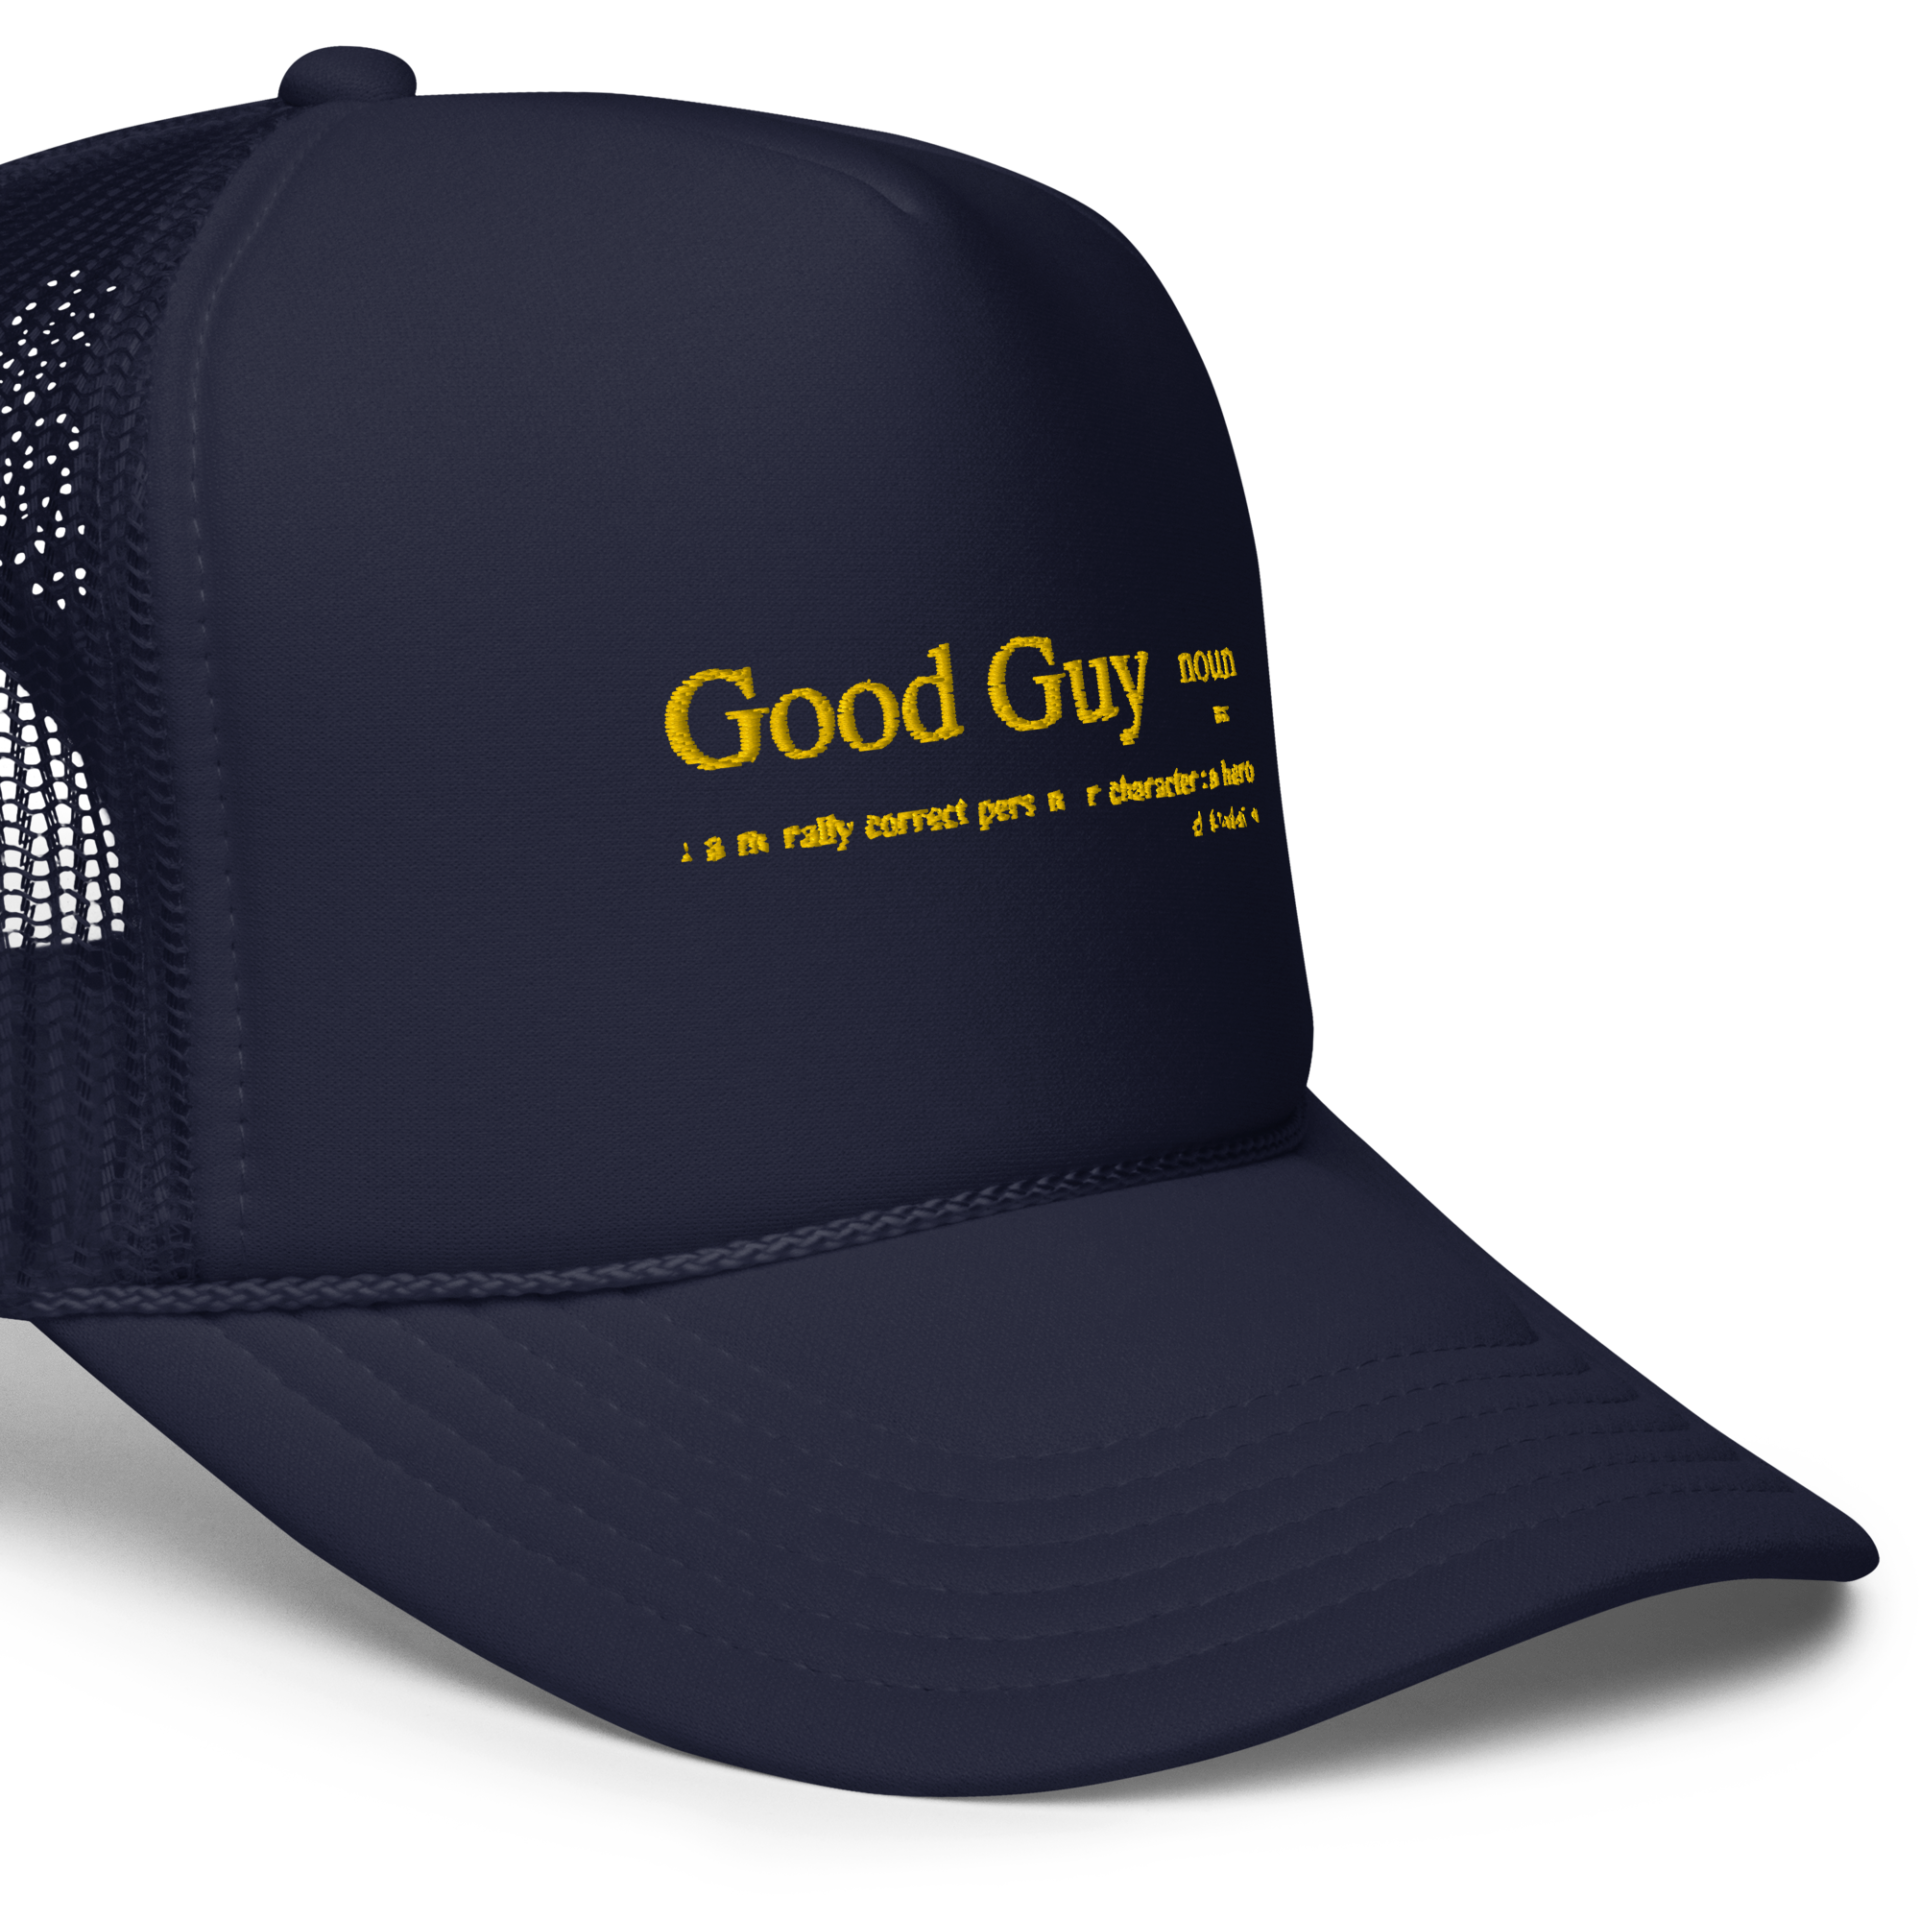 foam-trucker-hat-navy-one-size-product-details-2-6453aa0820c88.png